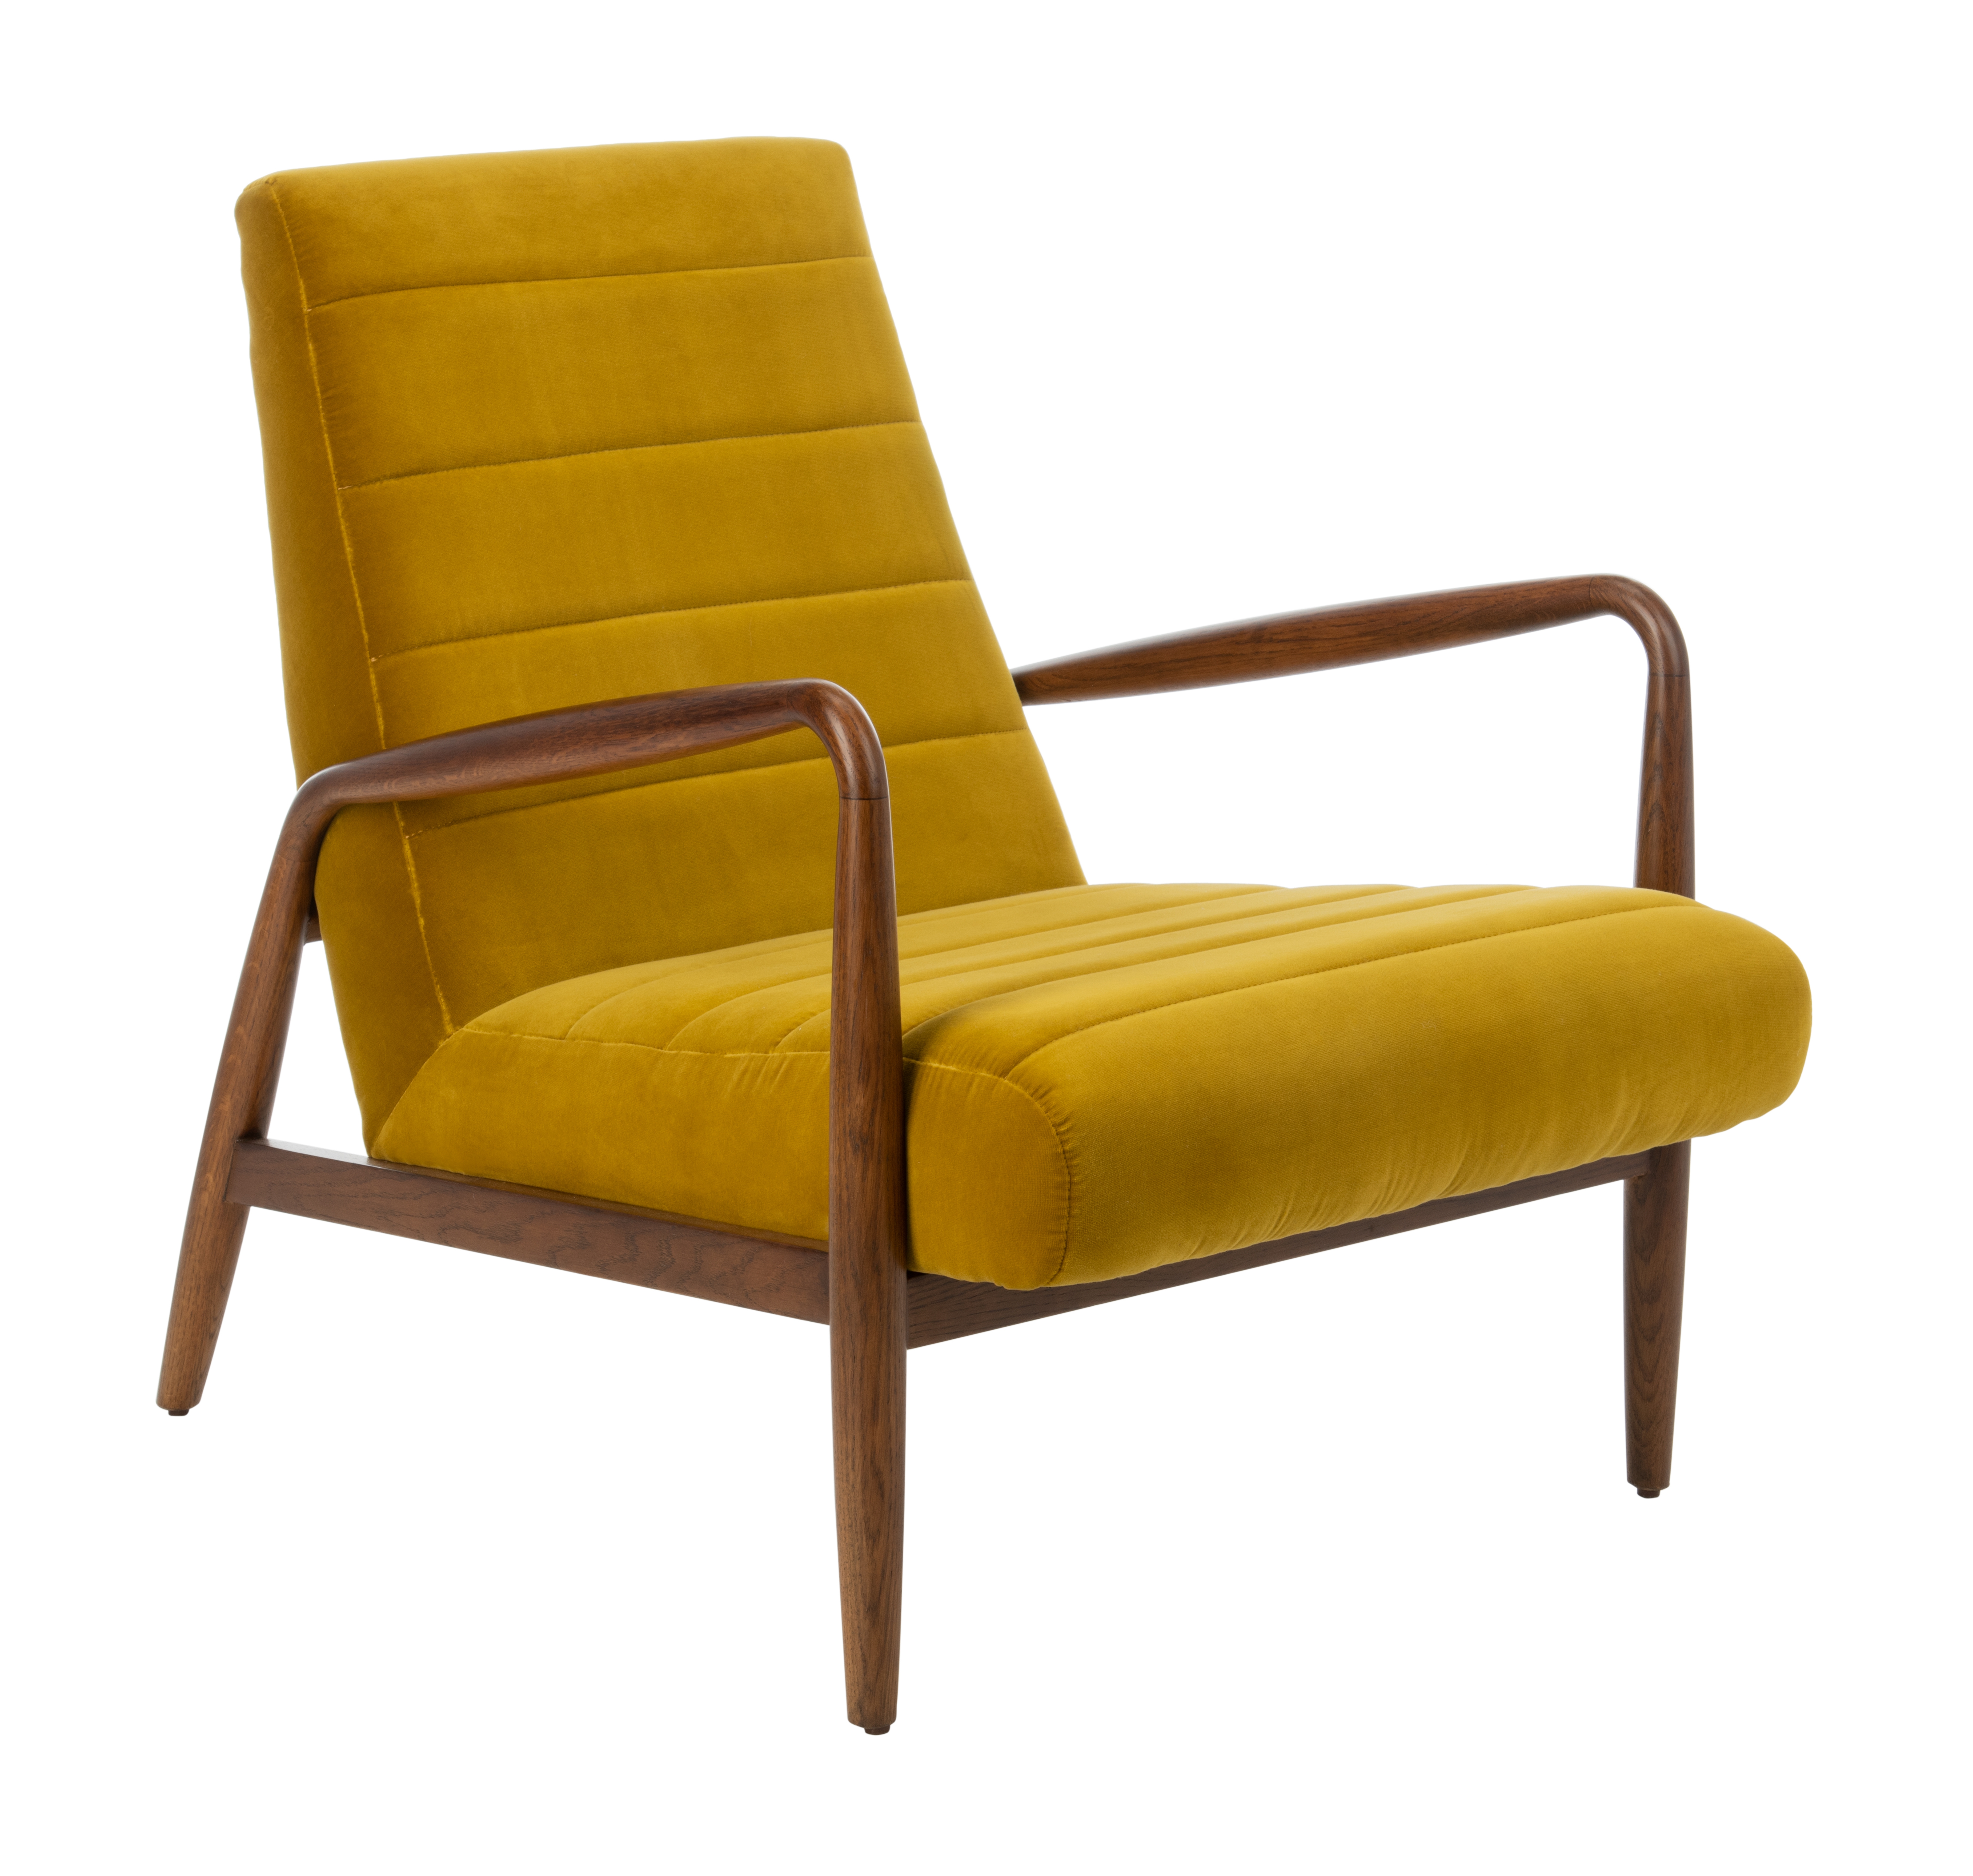 Willow Channel Tufted Arm Chair - Gold/Dark Walnut - Arlo Home - Arlo Home